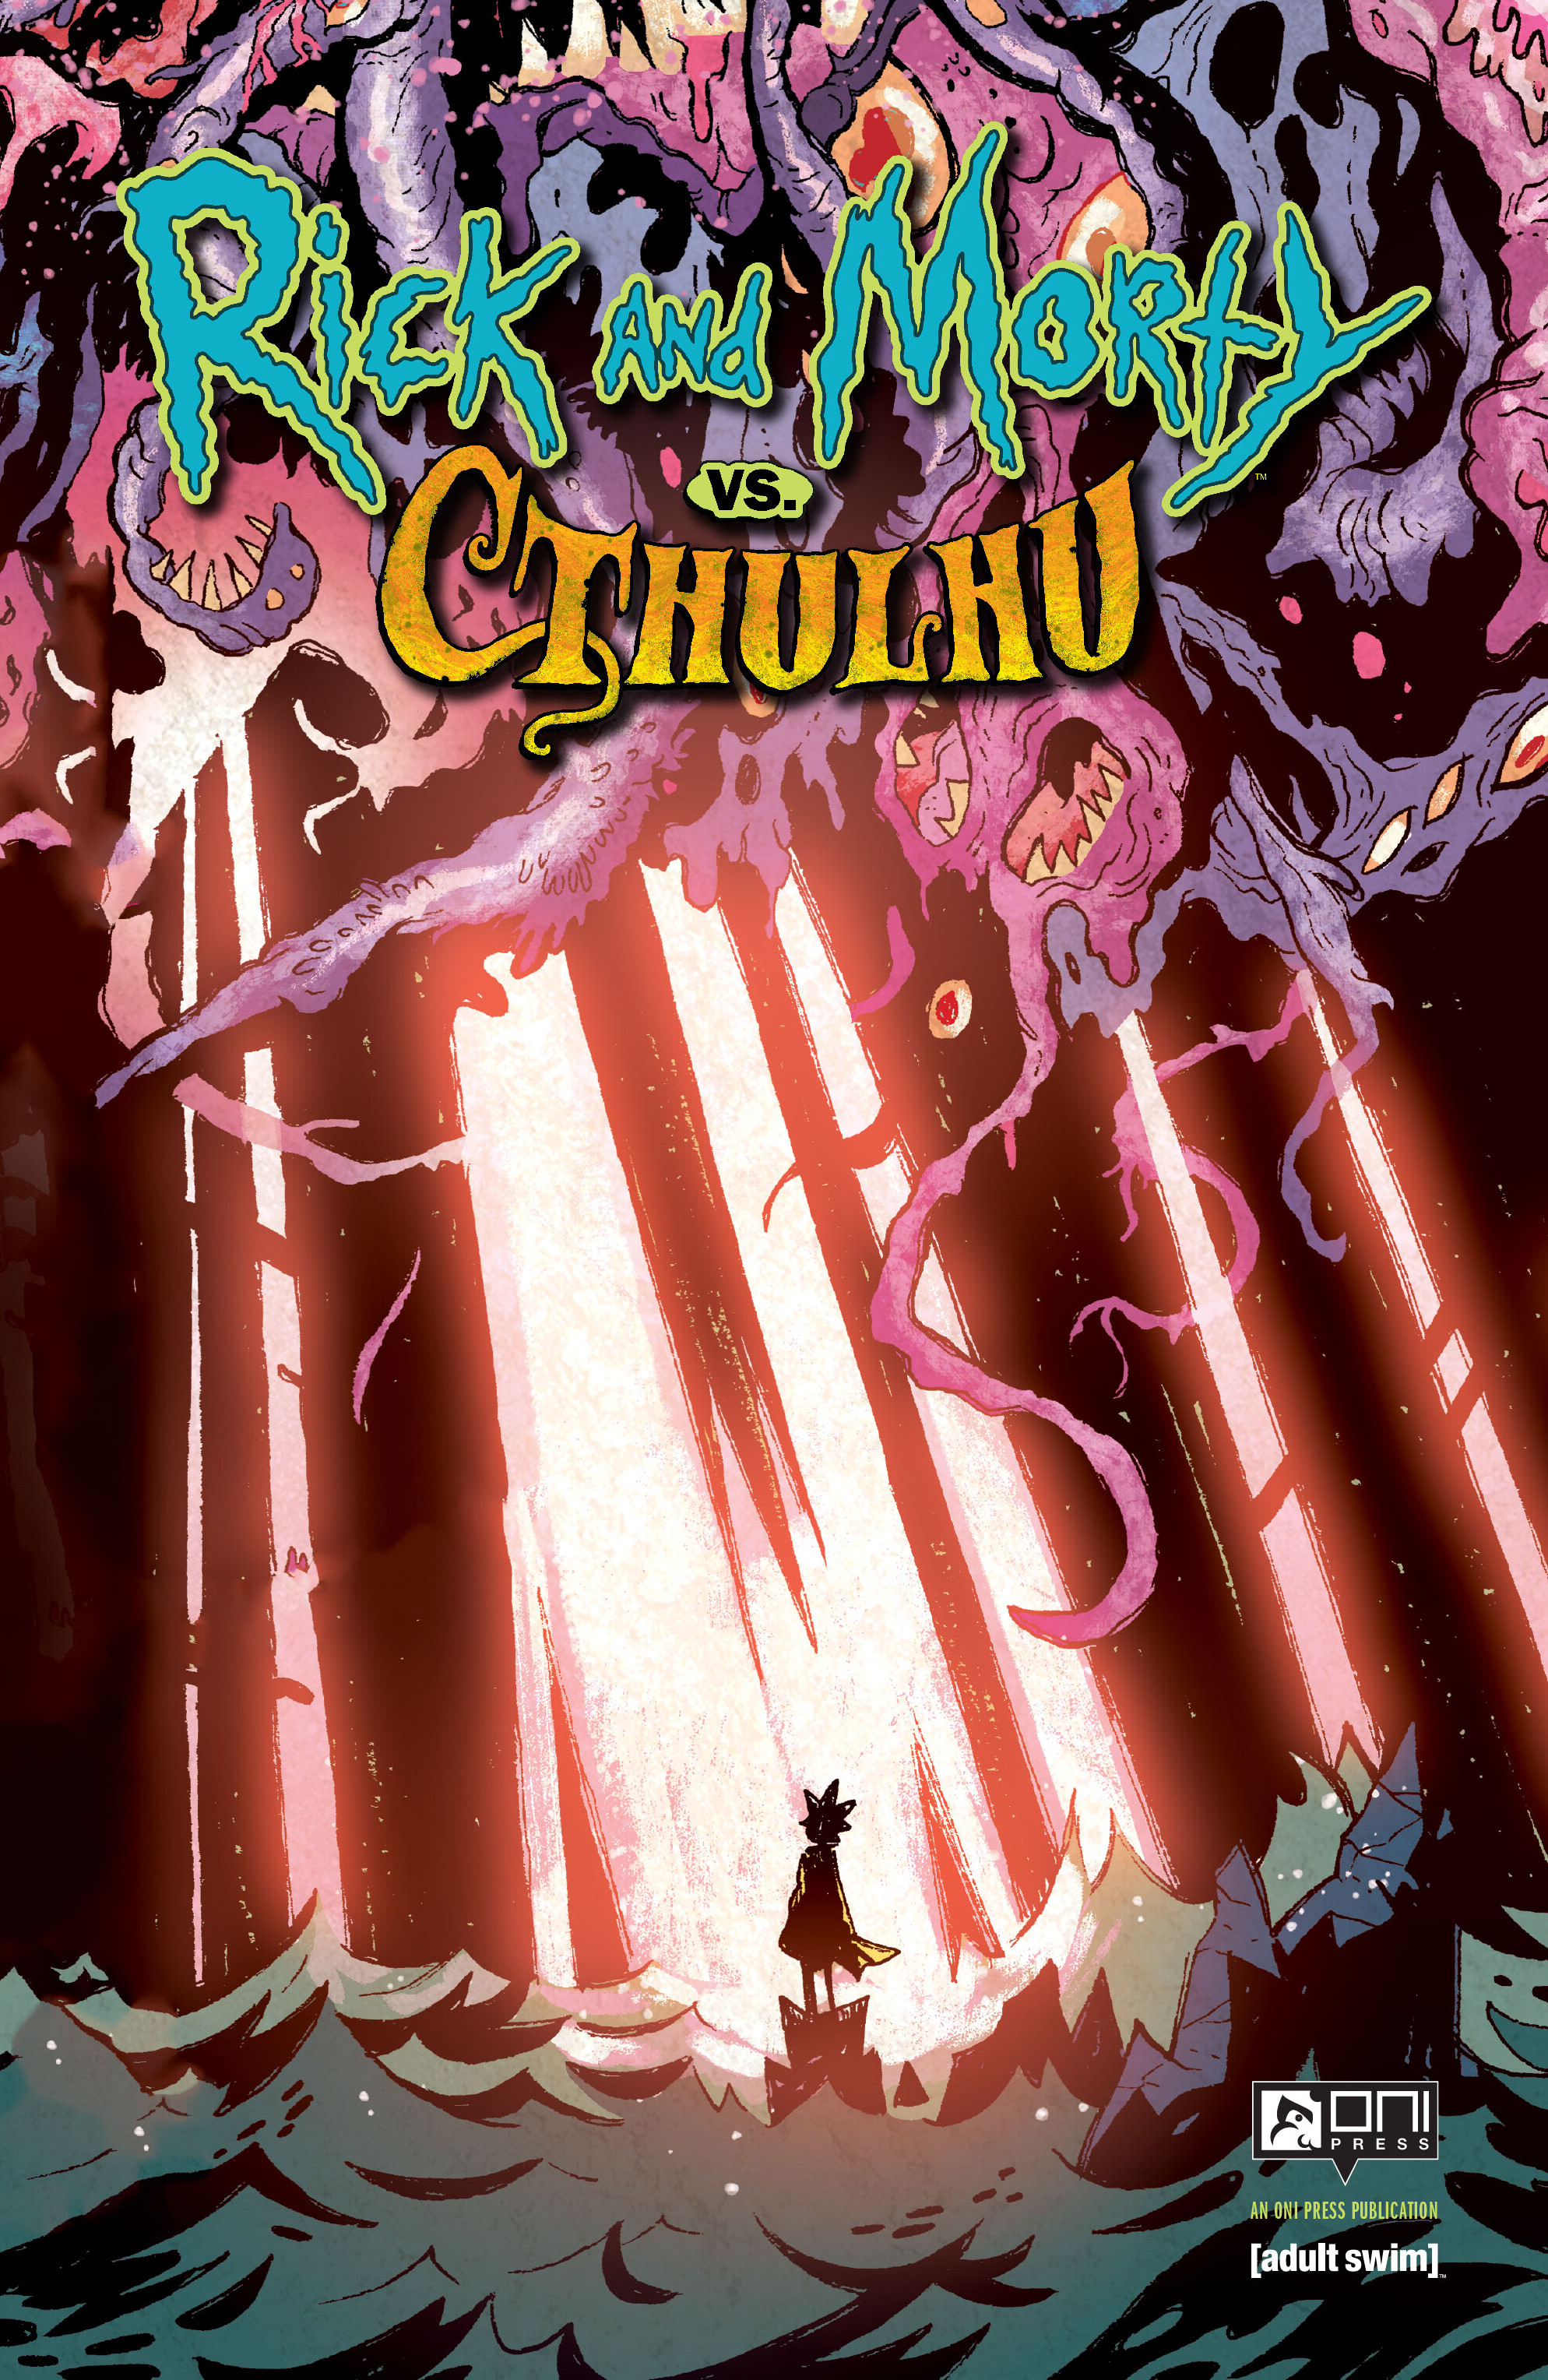 Read online Rick and Morty: vs. Cthulhu comic -  Issue # TPB - 2